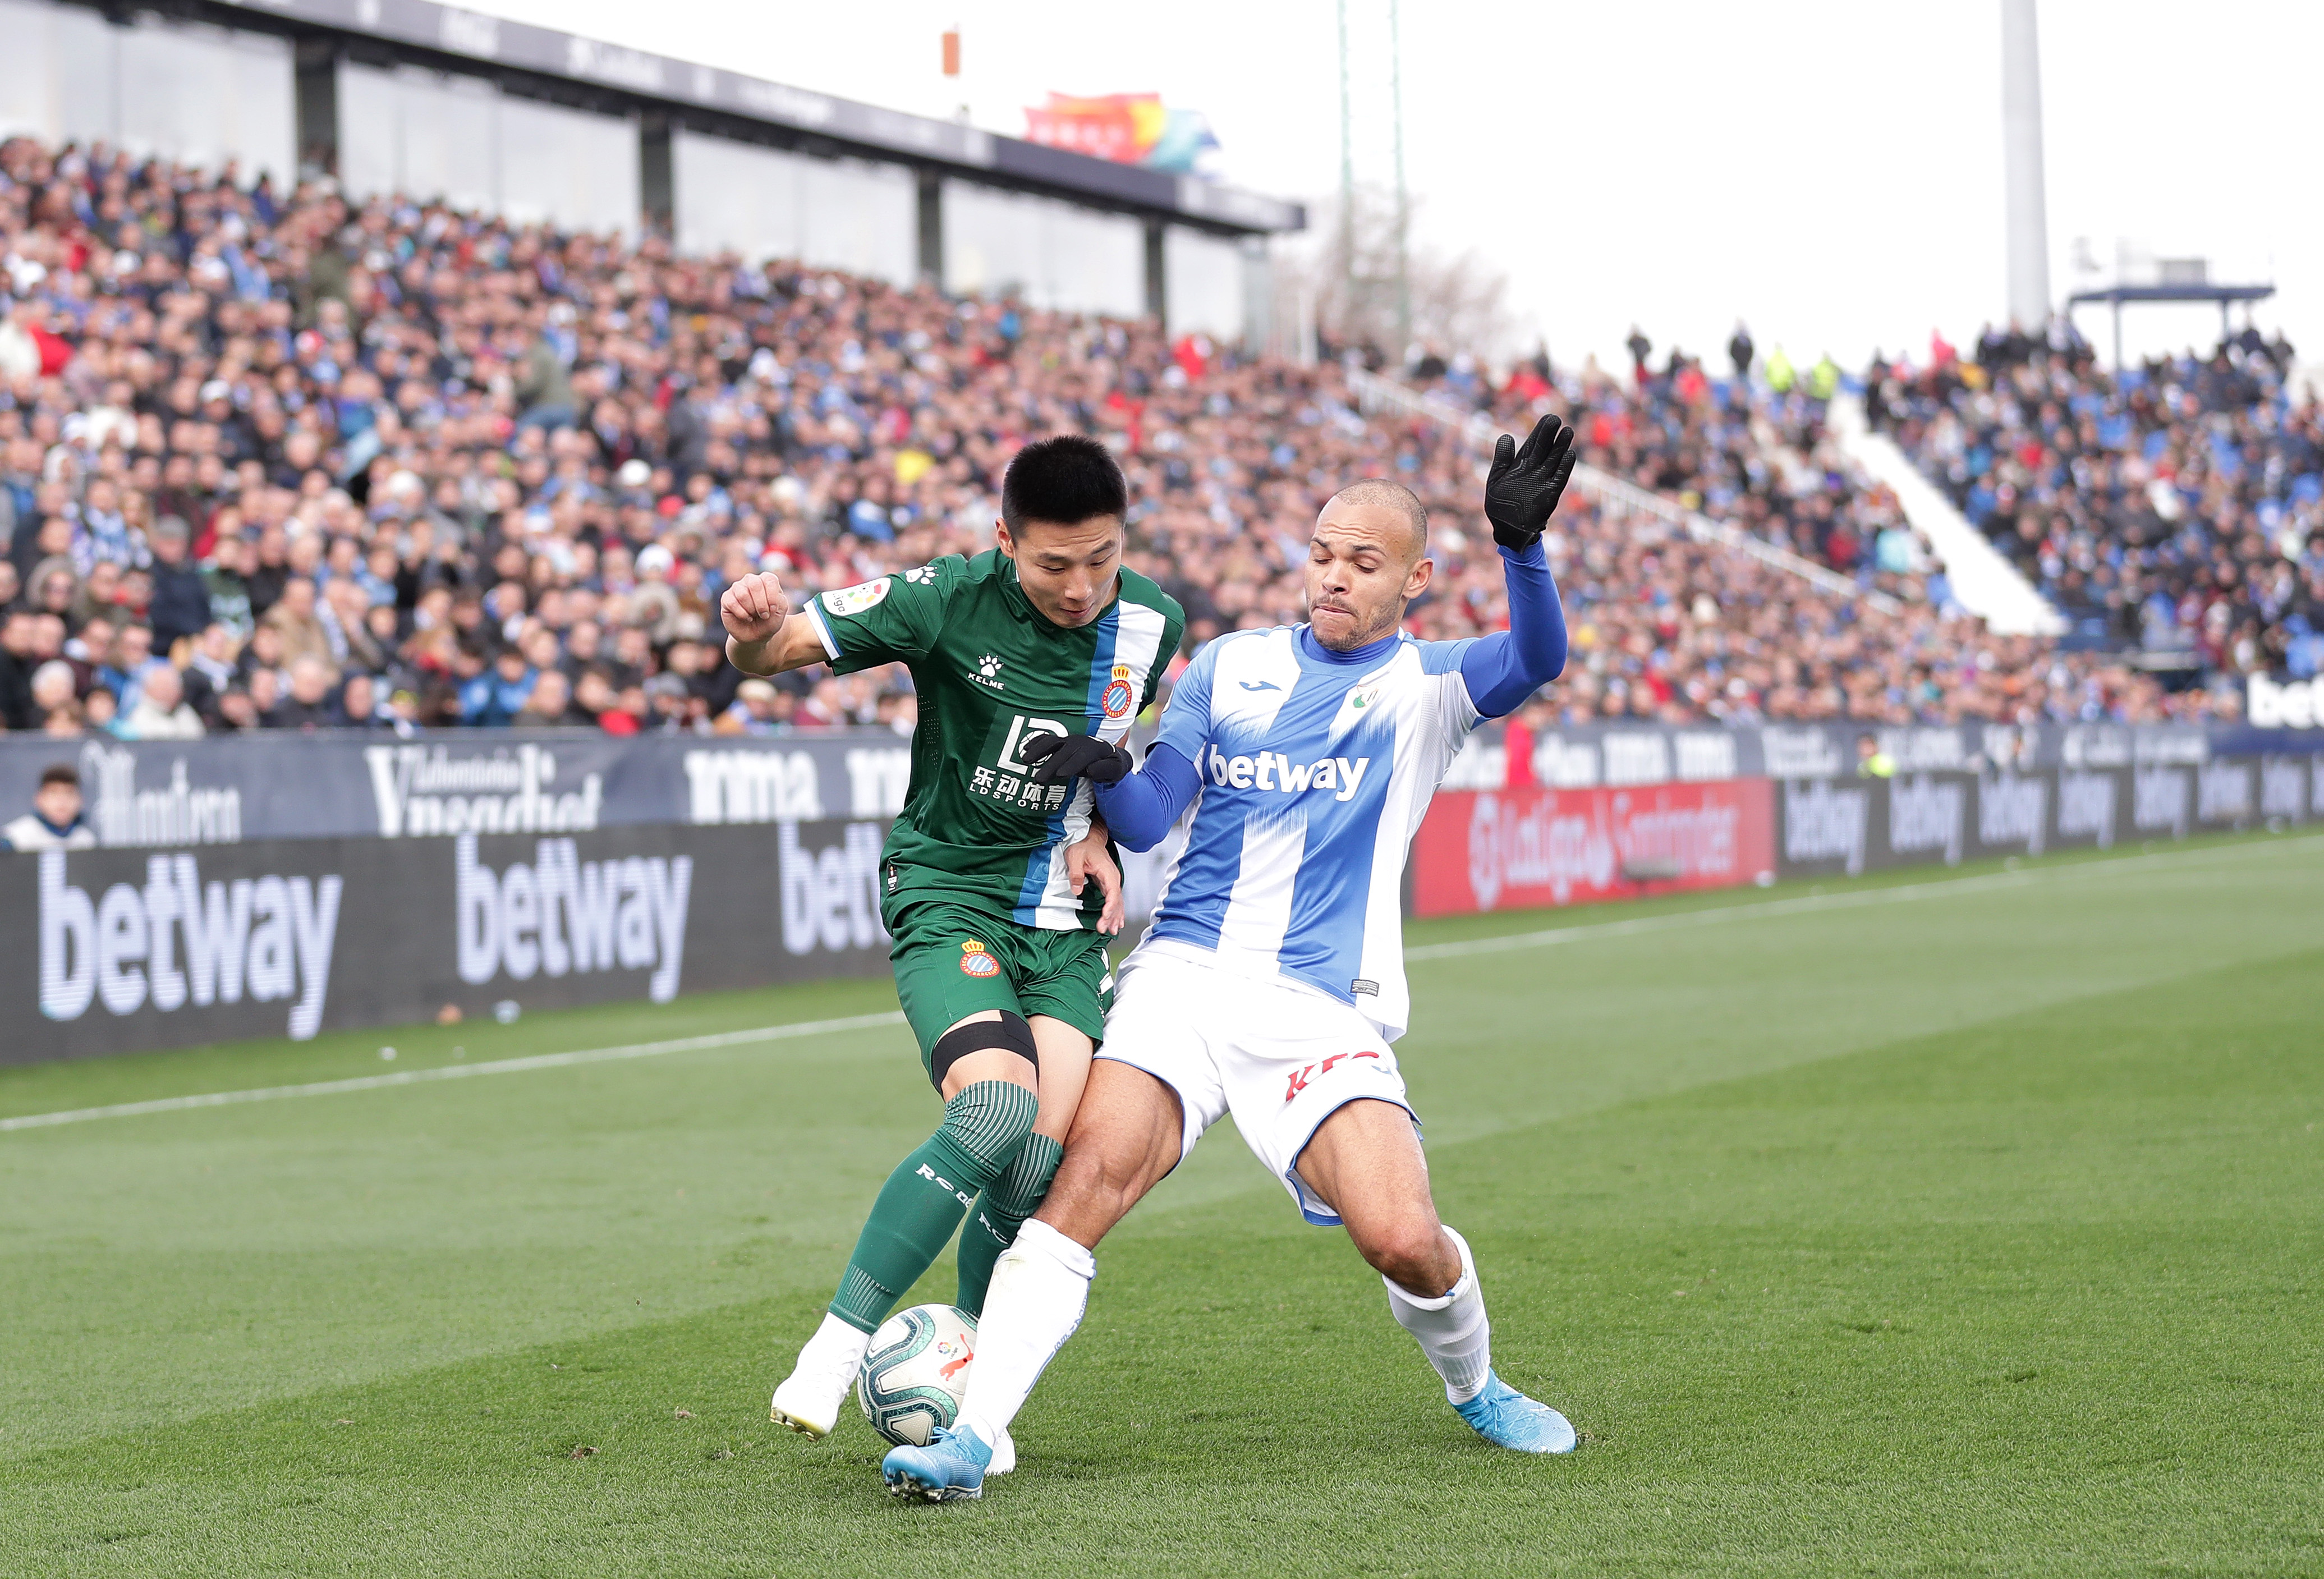 LEGANES, SPAIN - DECEMBER 22: Martin Braithwaite of Leganes and Wu Lei of Espanyol during the Liga match between CD Leganes and RCD Espanyol at Estadio Municipal de Butarque on December 22, 2019 in Leganes, Spain. (Photo by Gonzalo Arroyo Moreno/Getty Images)